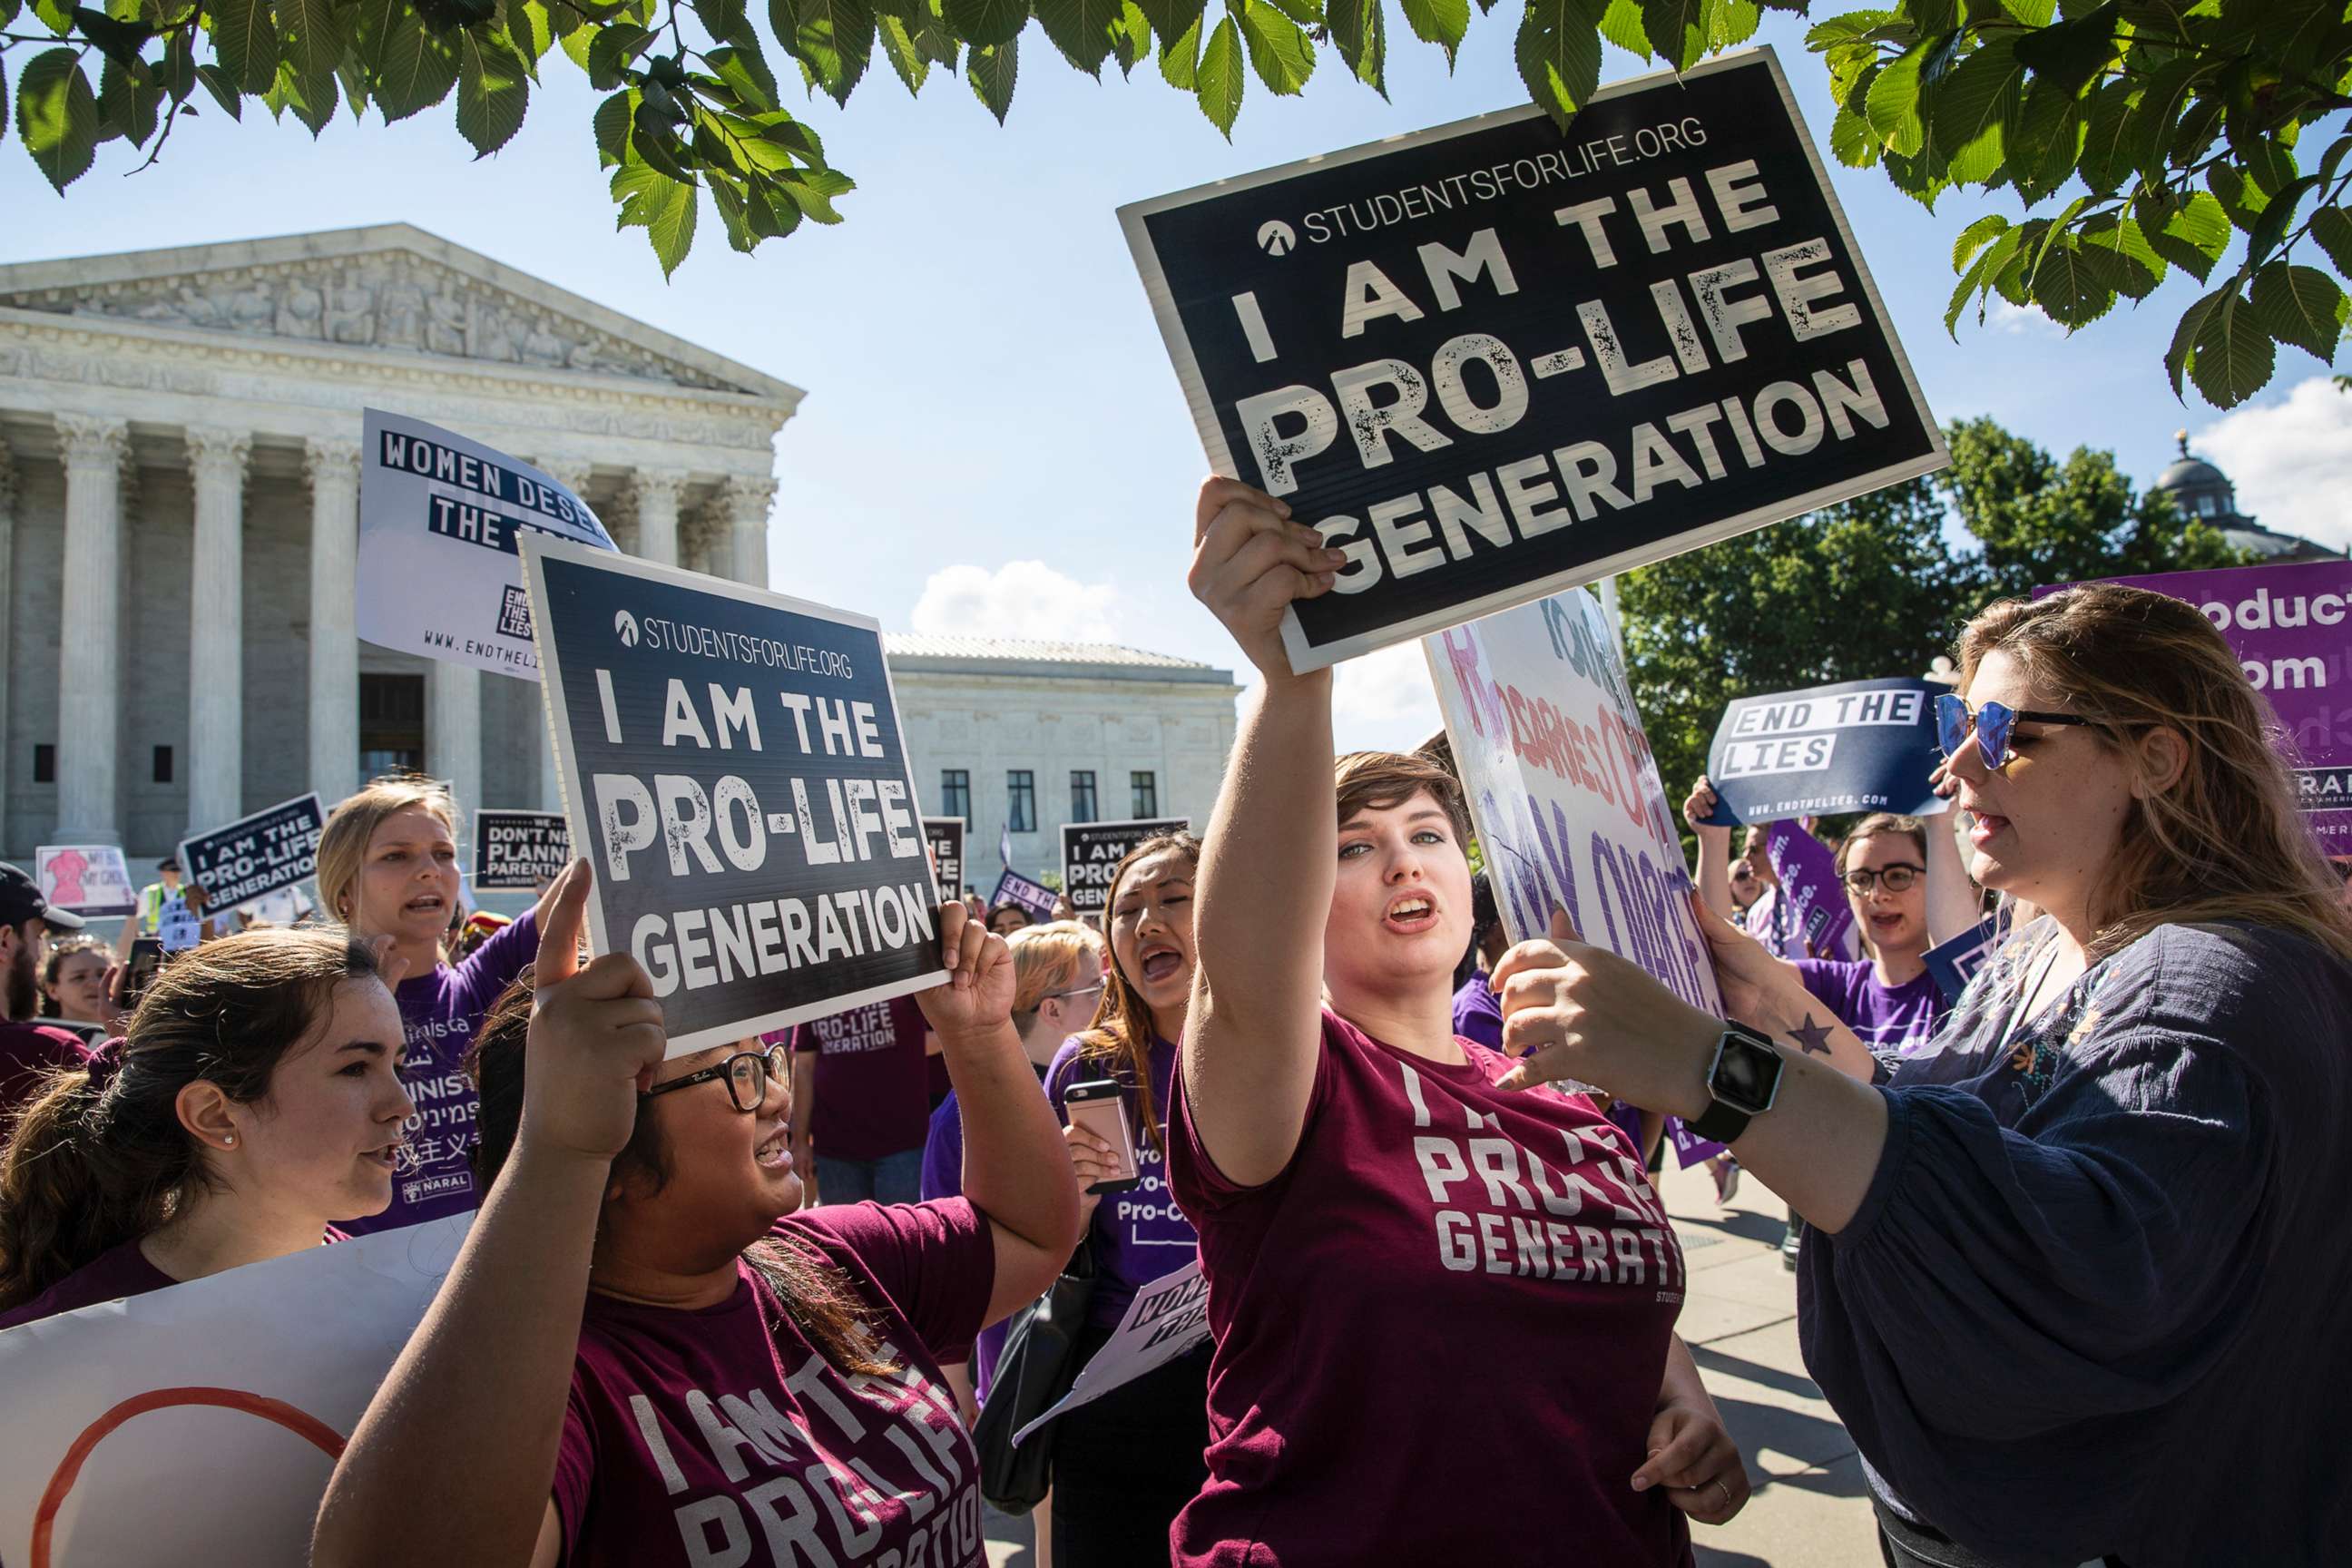 PHOTO: Pro-life and anti-abortion advocates demonstrate in front of the Supreme Court, June 25, 2018.